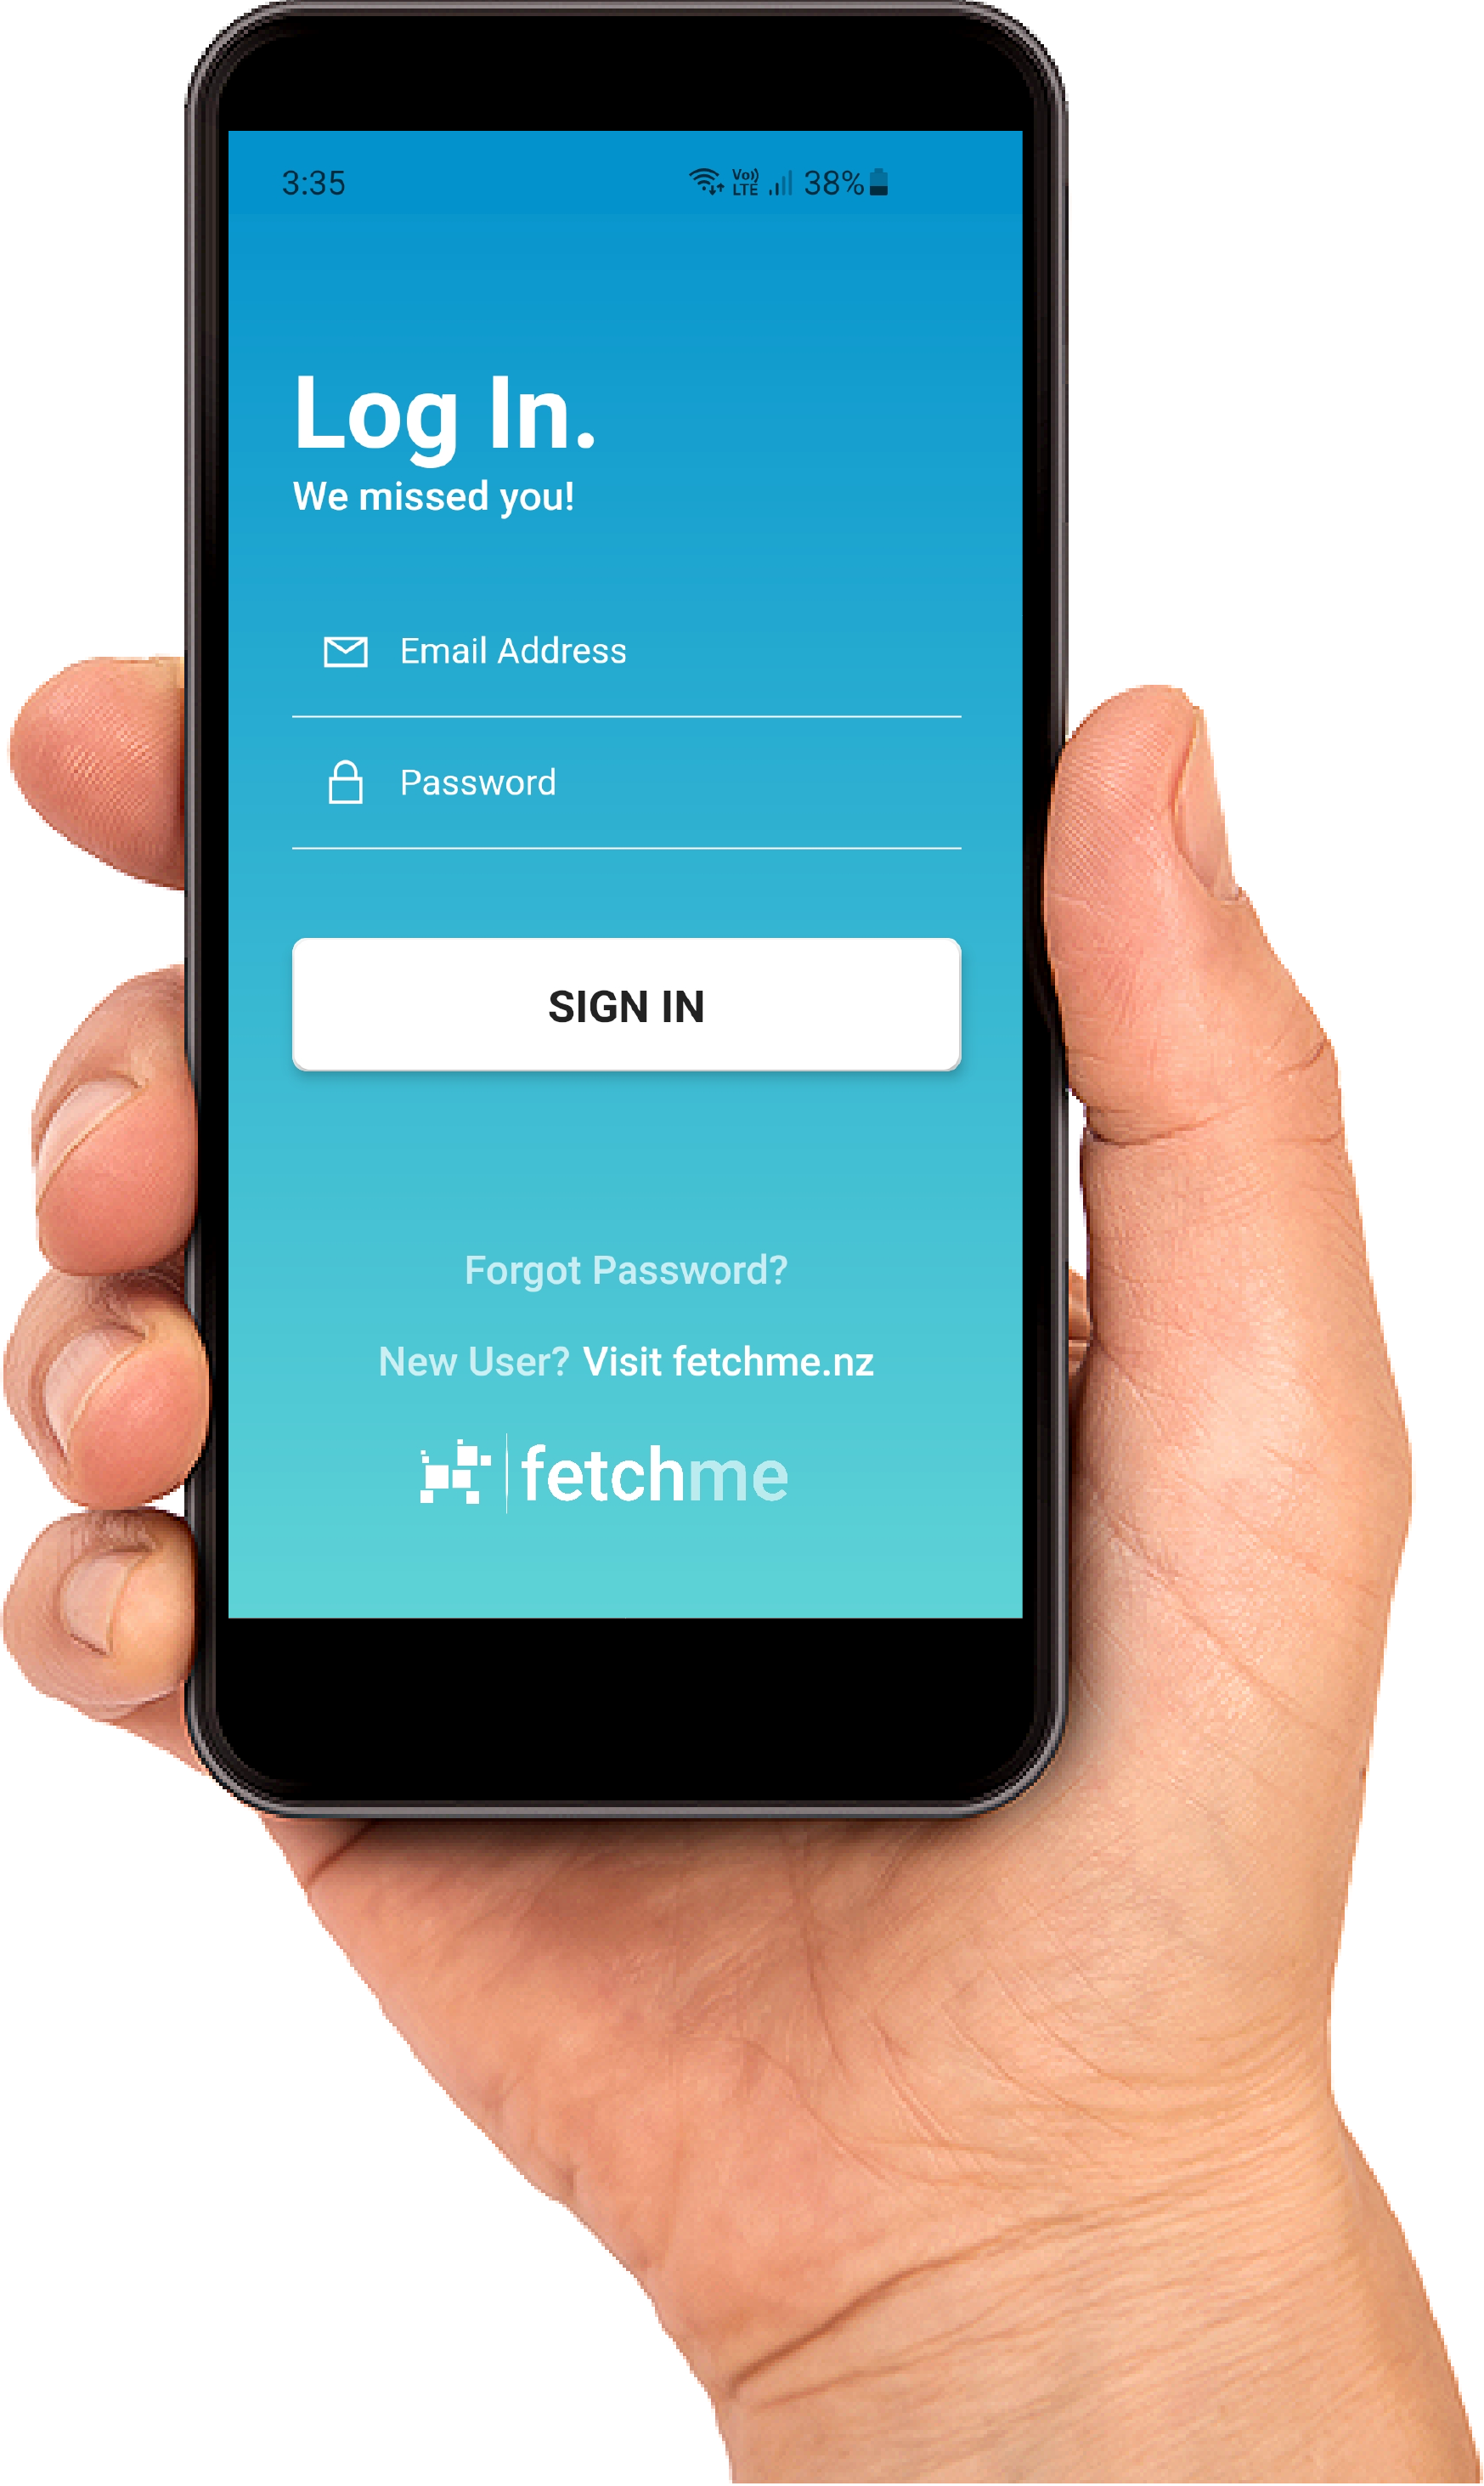 A mobile phone showing the login screen for the FetchMe app